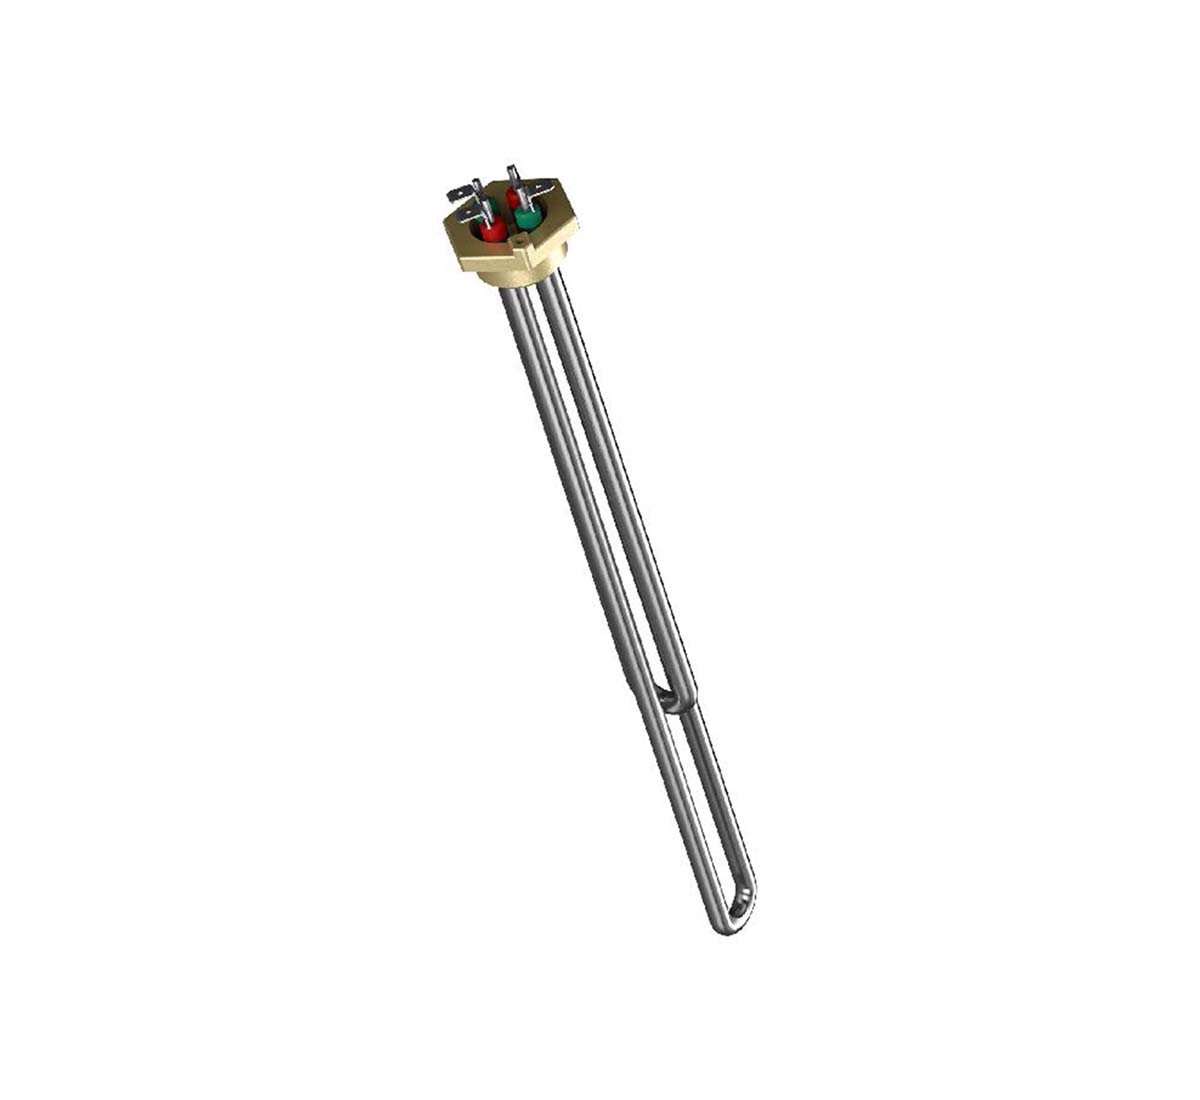 A picture of a Backer immersion heater for liquid heating with element tubes in acidproof stainless steel